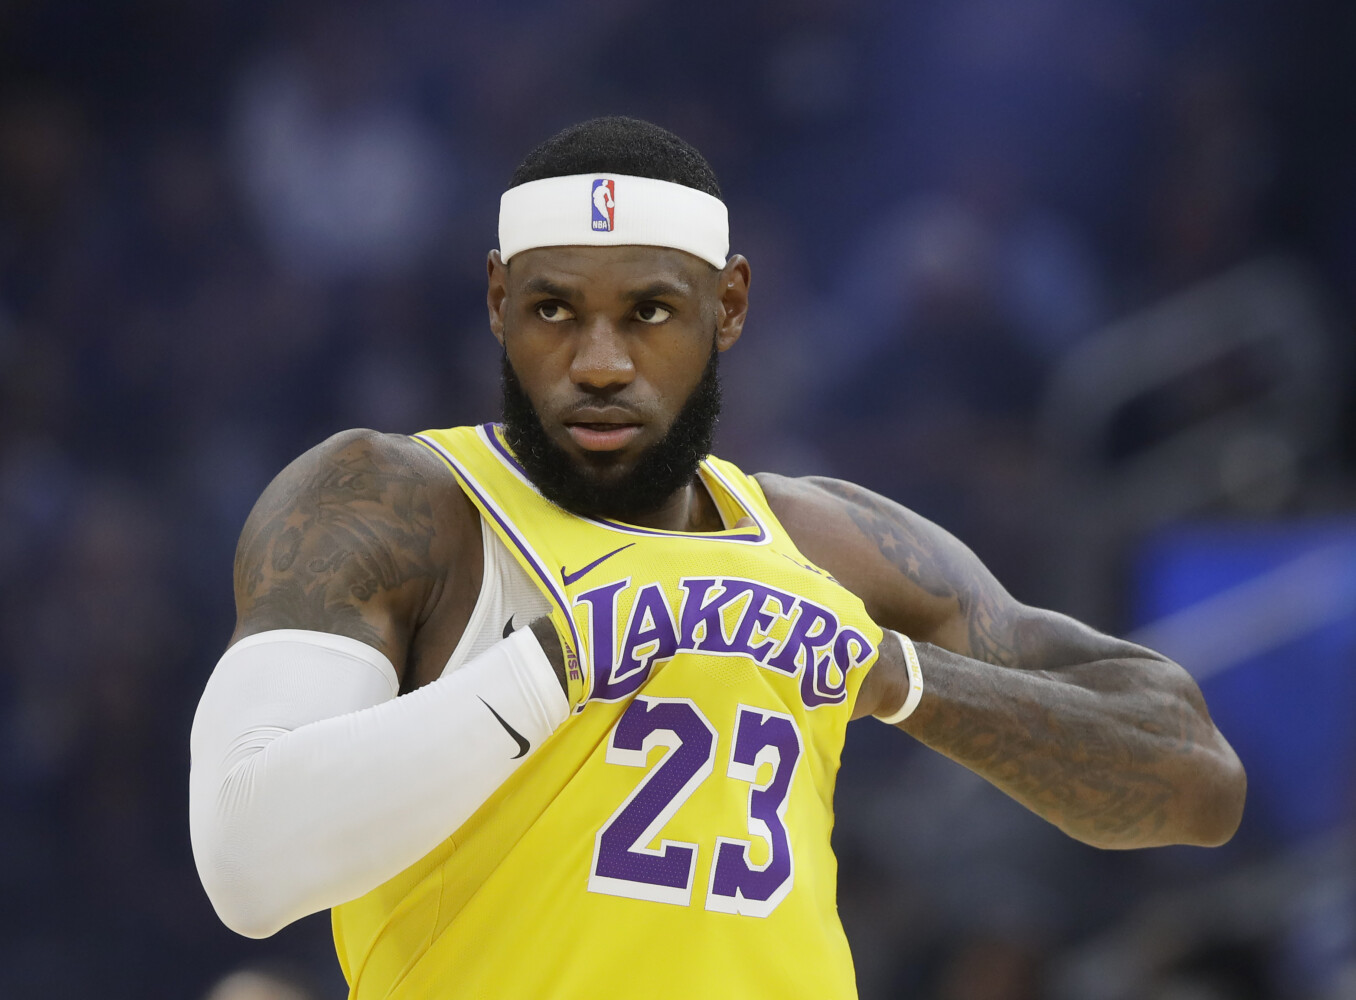 LeBron James criticized for saying Rockets GM 'misinformed' on Hong Kong